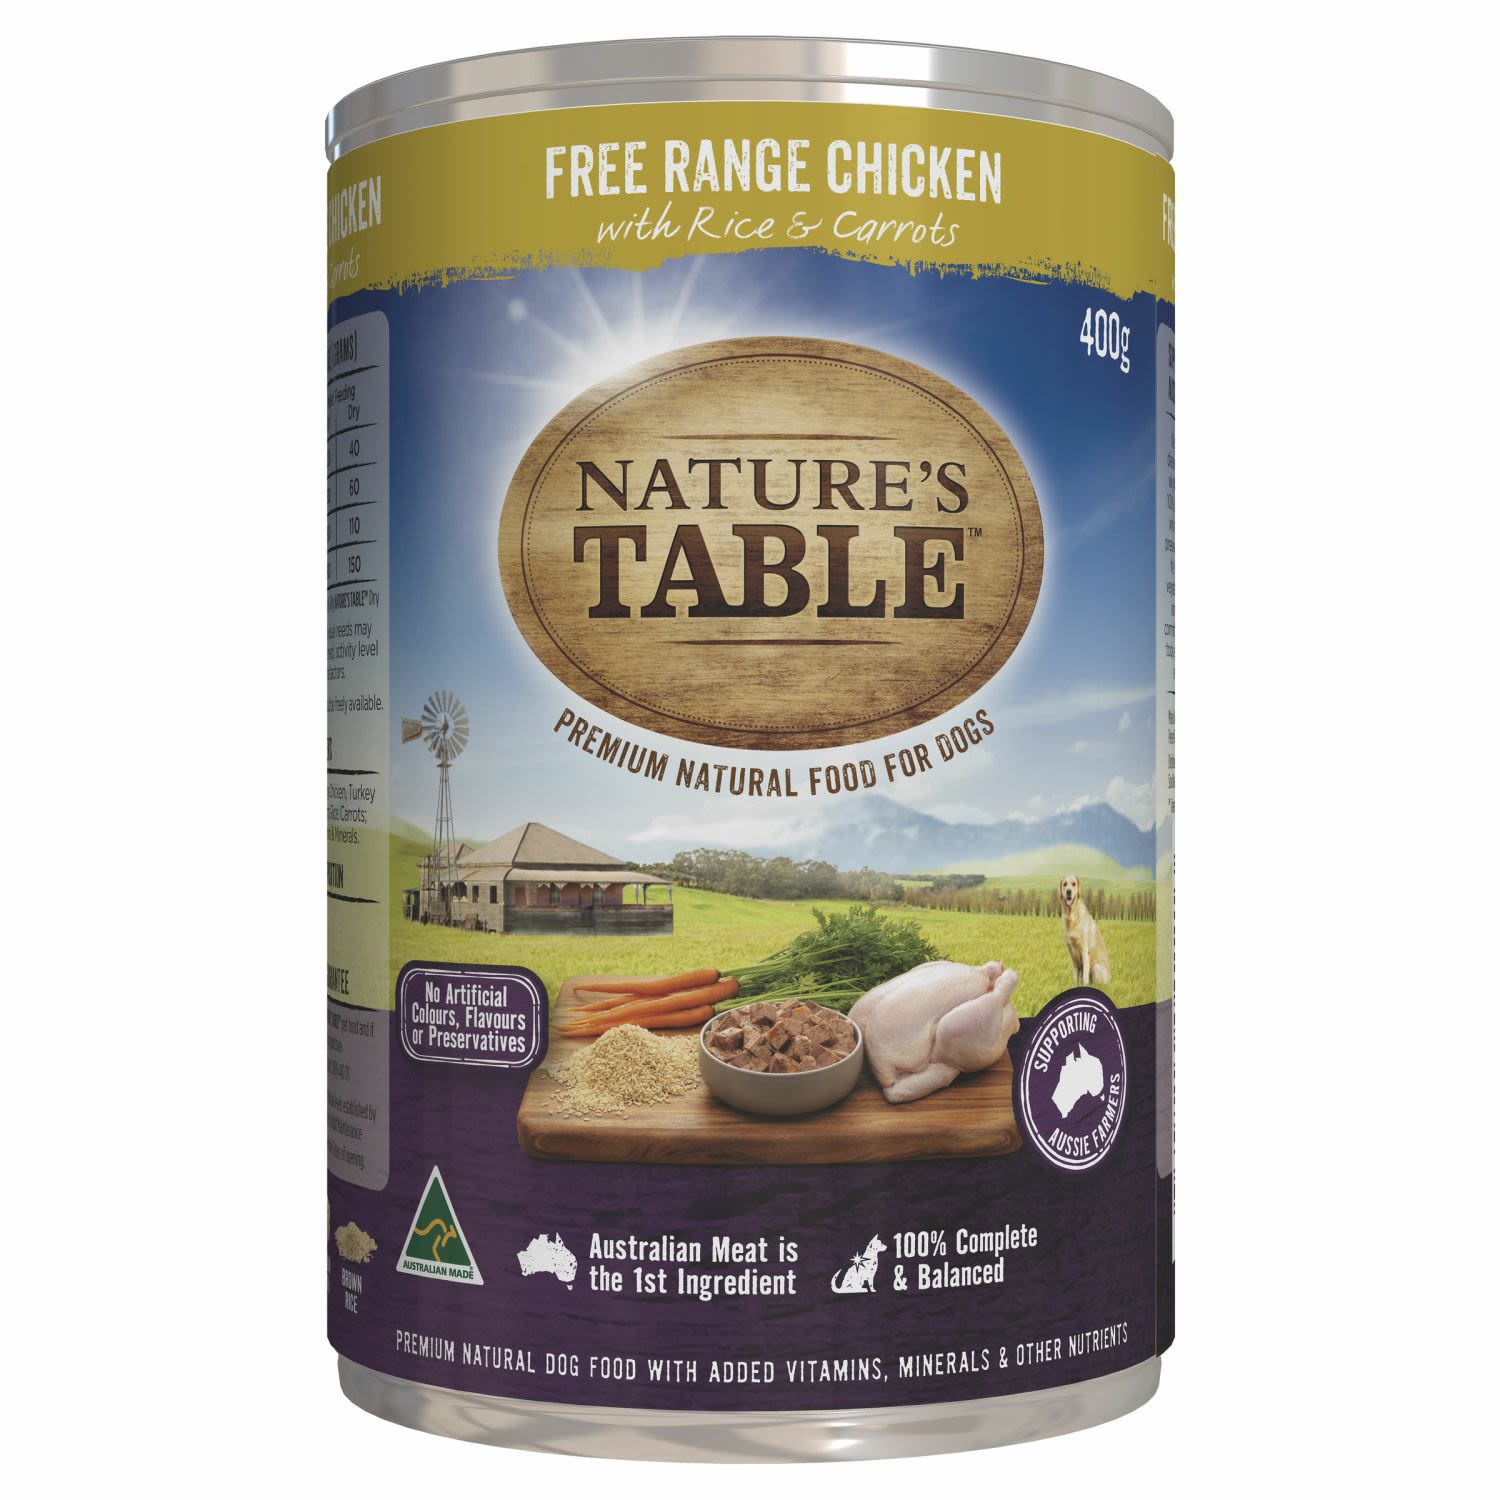 Nature's Table Free Range Chicken with Rice and Carrots Wet Dog Food Can, 400 Gram